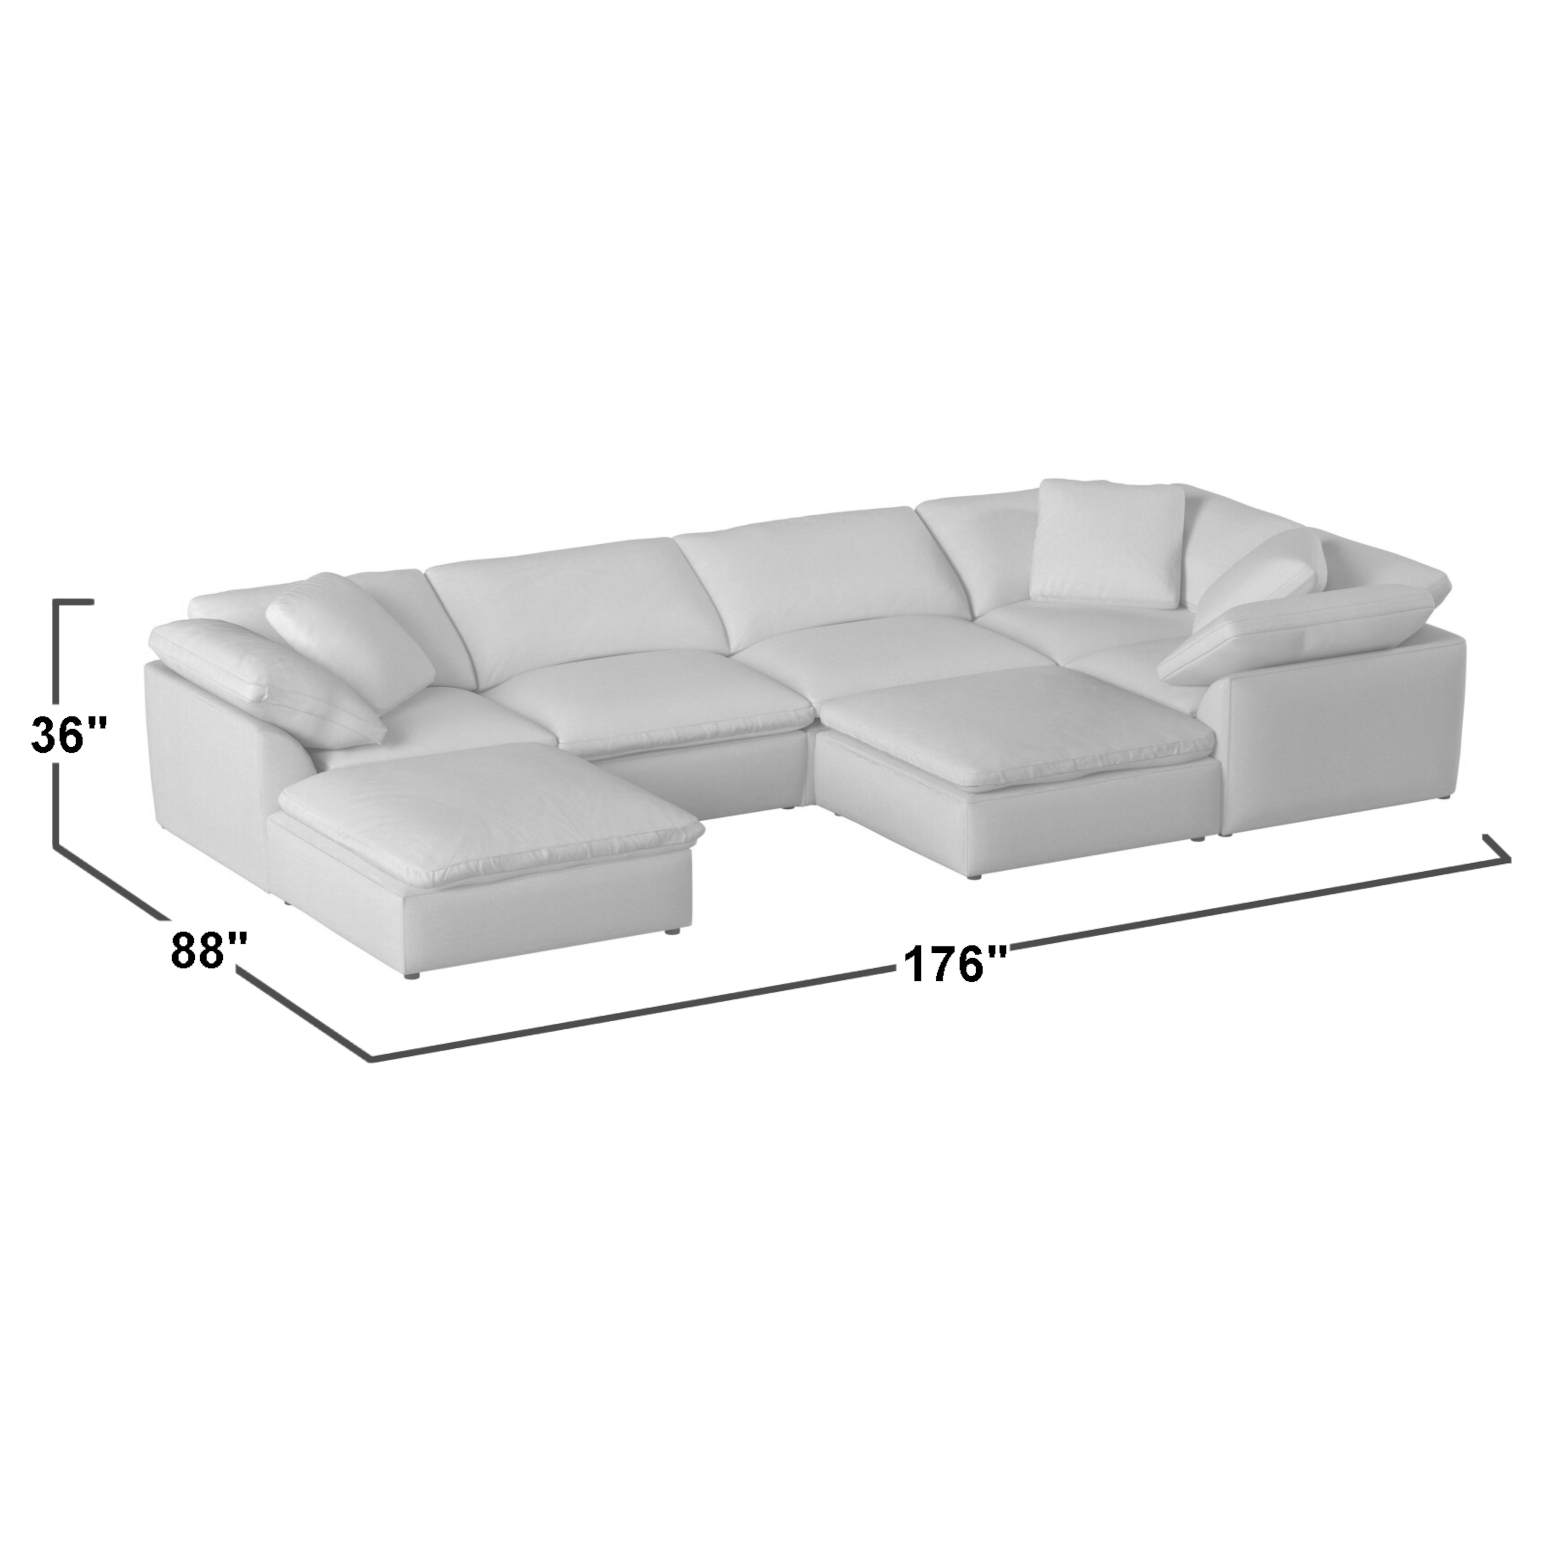 Cloud Puff Slipcovered 7 PC Modular Sectional Sofa with Two Ottomans -  Color 391049 - Sunset Trading